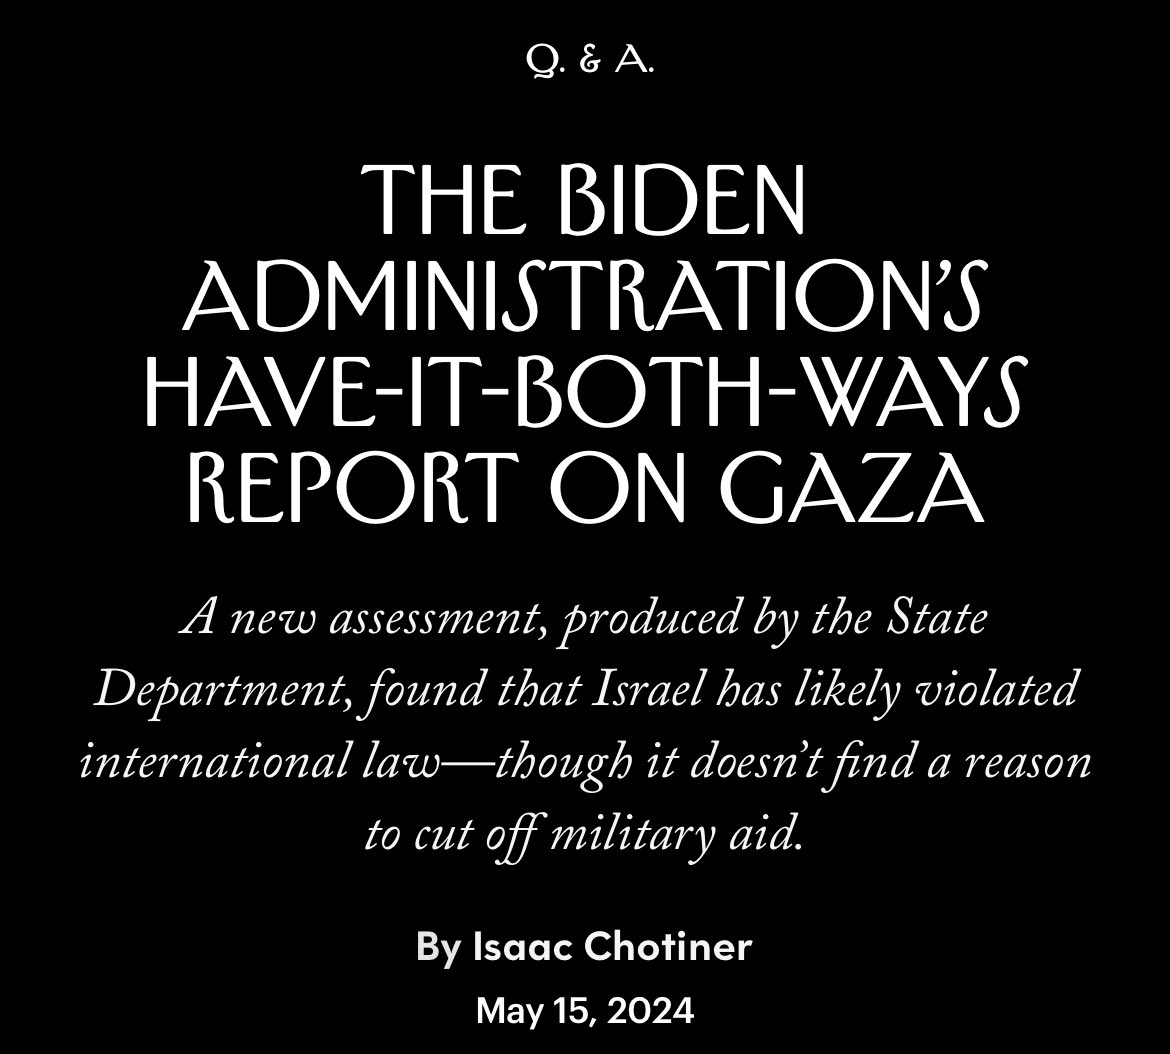 New Interview: I talked to Senator Chris Van Hollen about a confusing new Biden administration report on whether Israel is violating international humanitarian law in Gaza, and what it suggests about American policy going forward. newyorker.com/news/q-and-a/t…